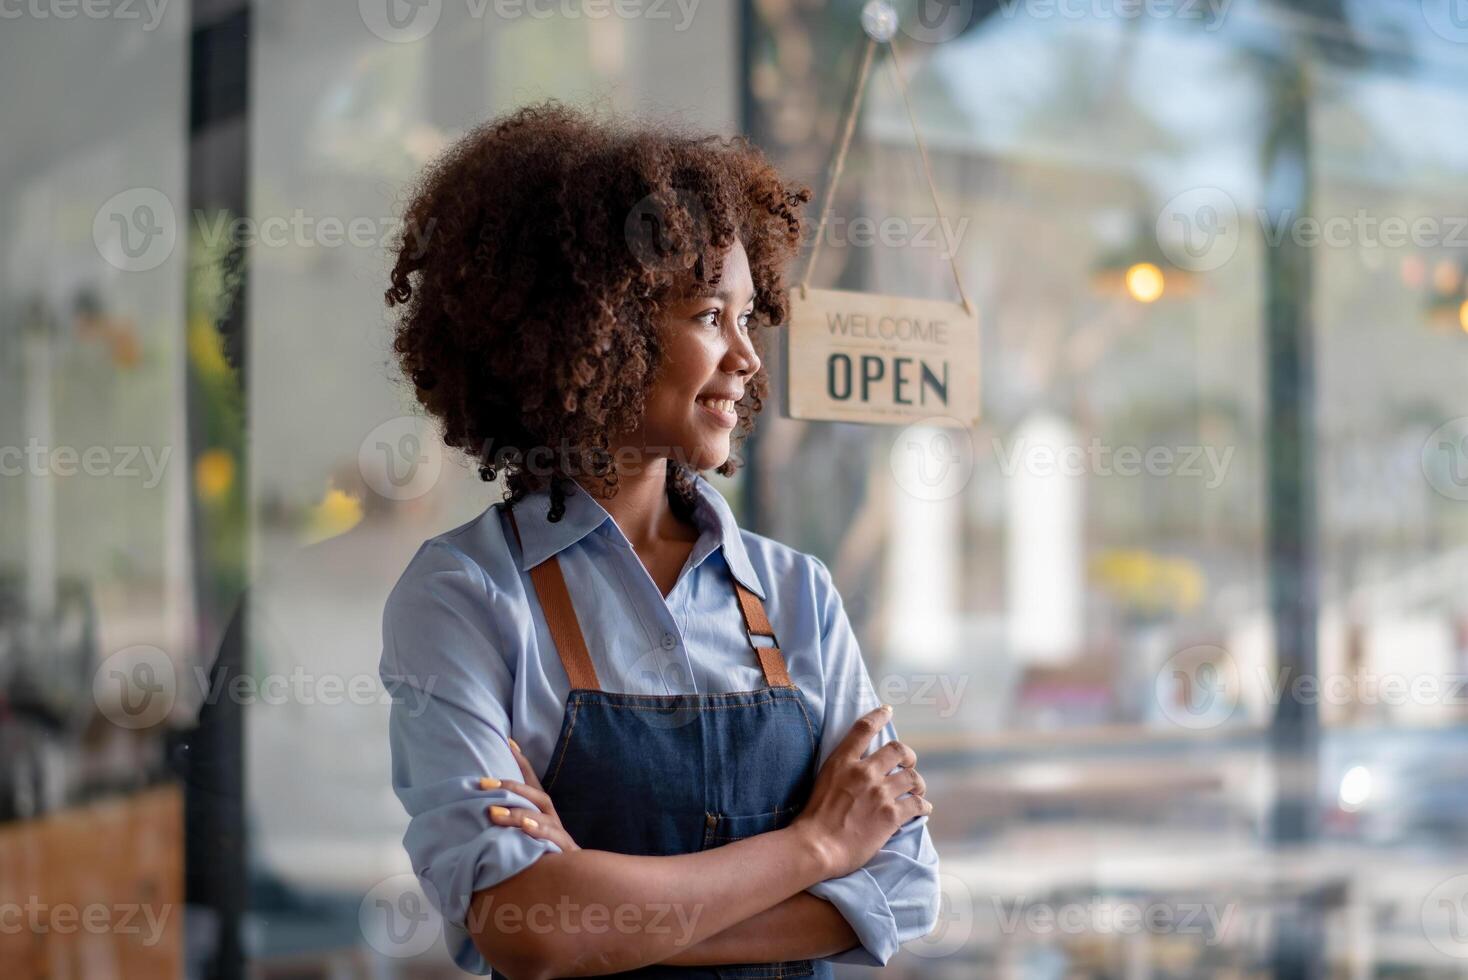 Female African coffee shop small business owner wearing apron standing and look outside the shop, In the background there is a welcome sign photo